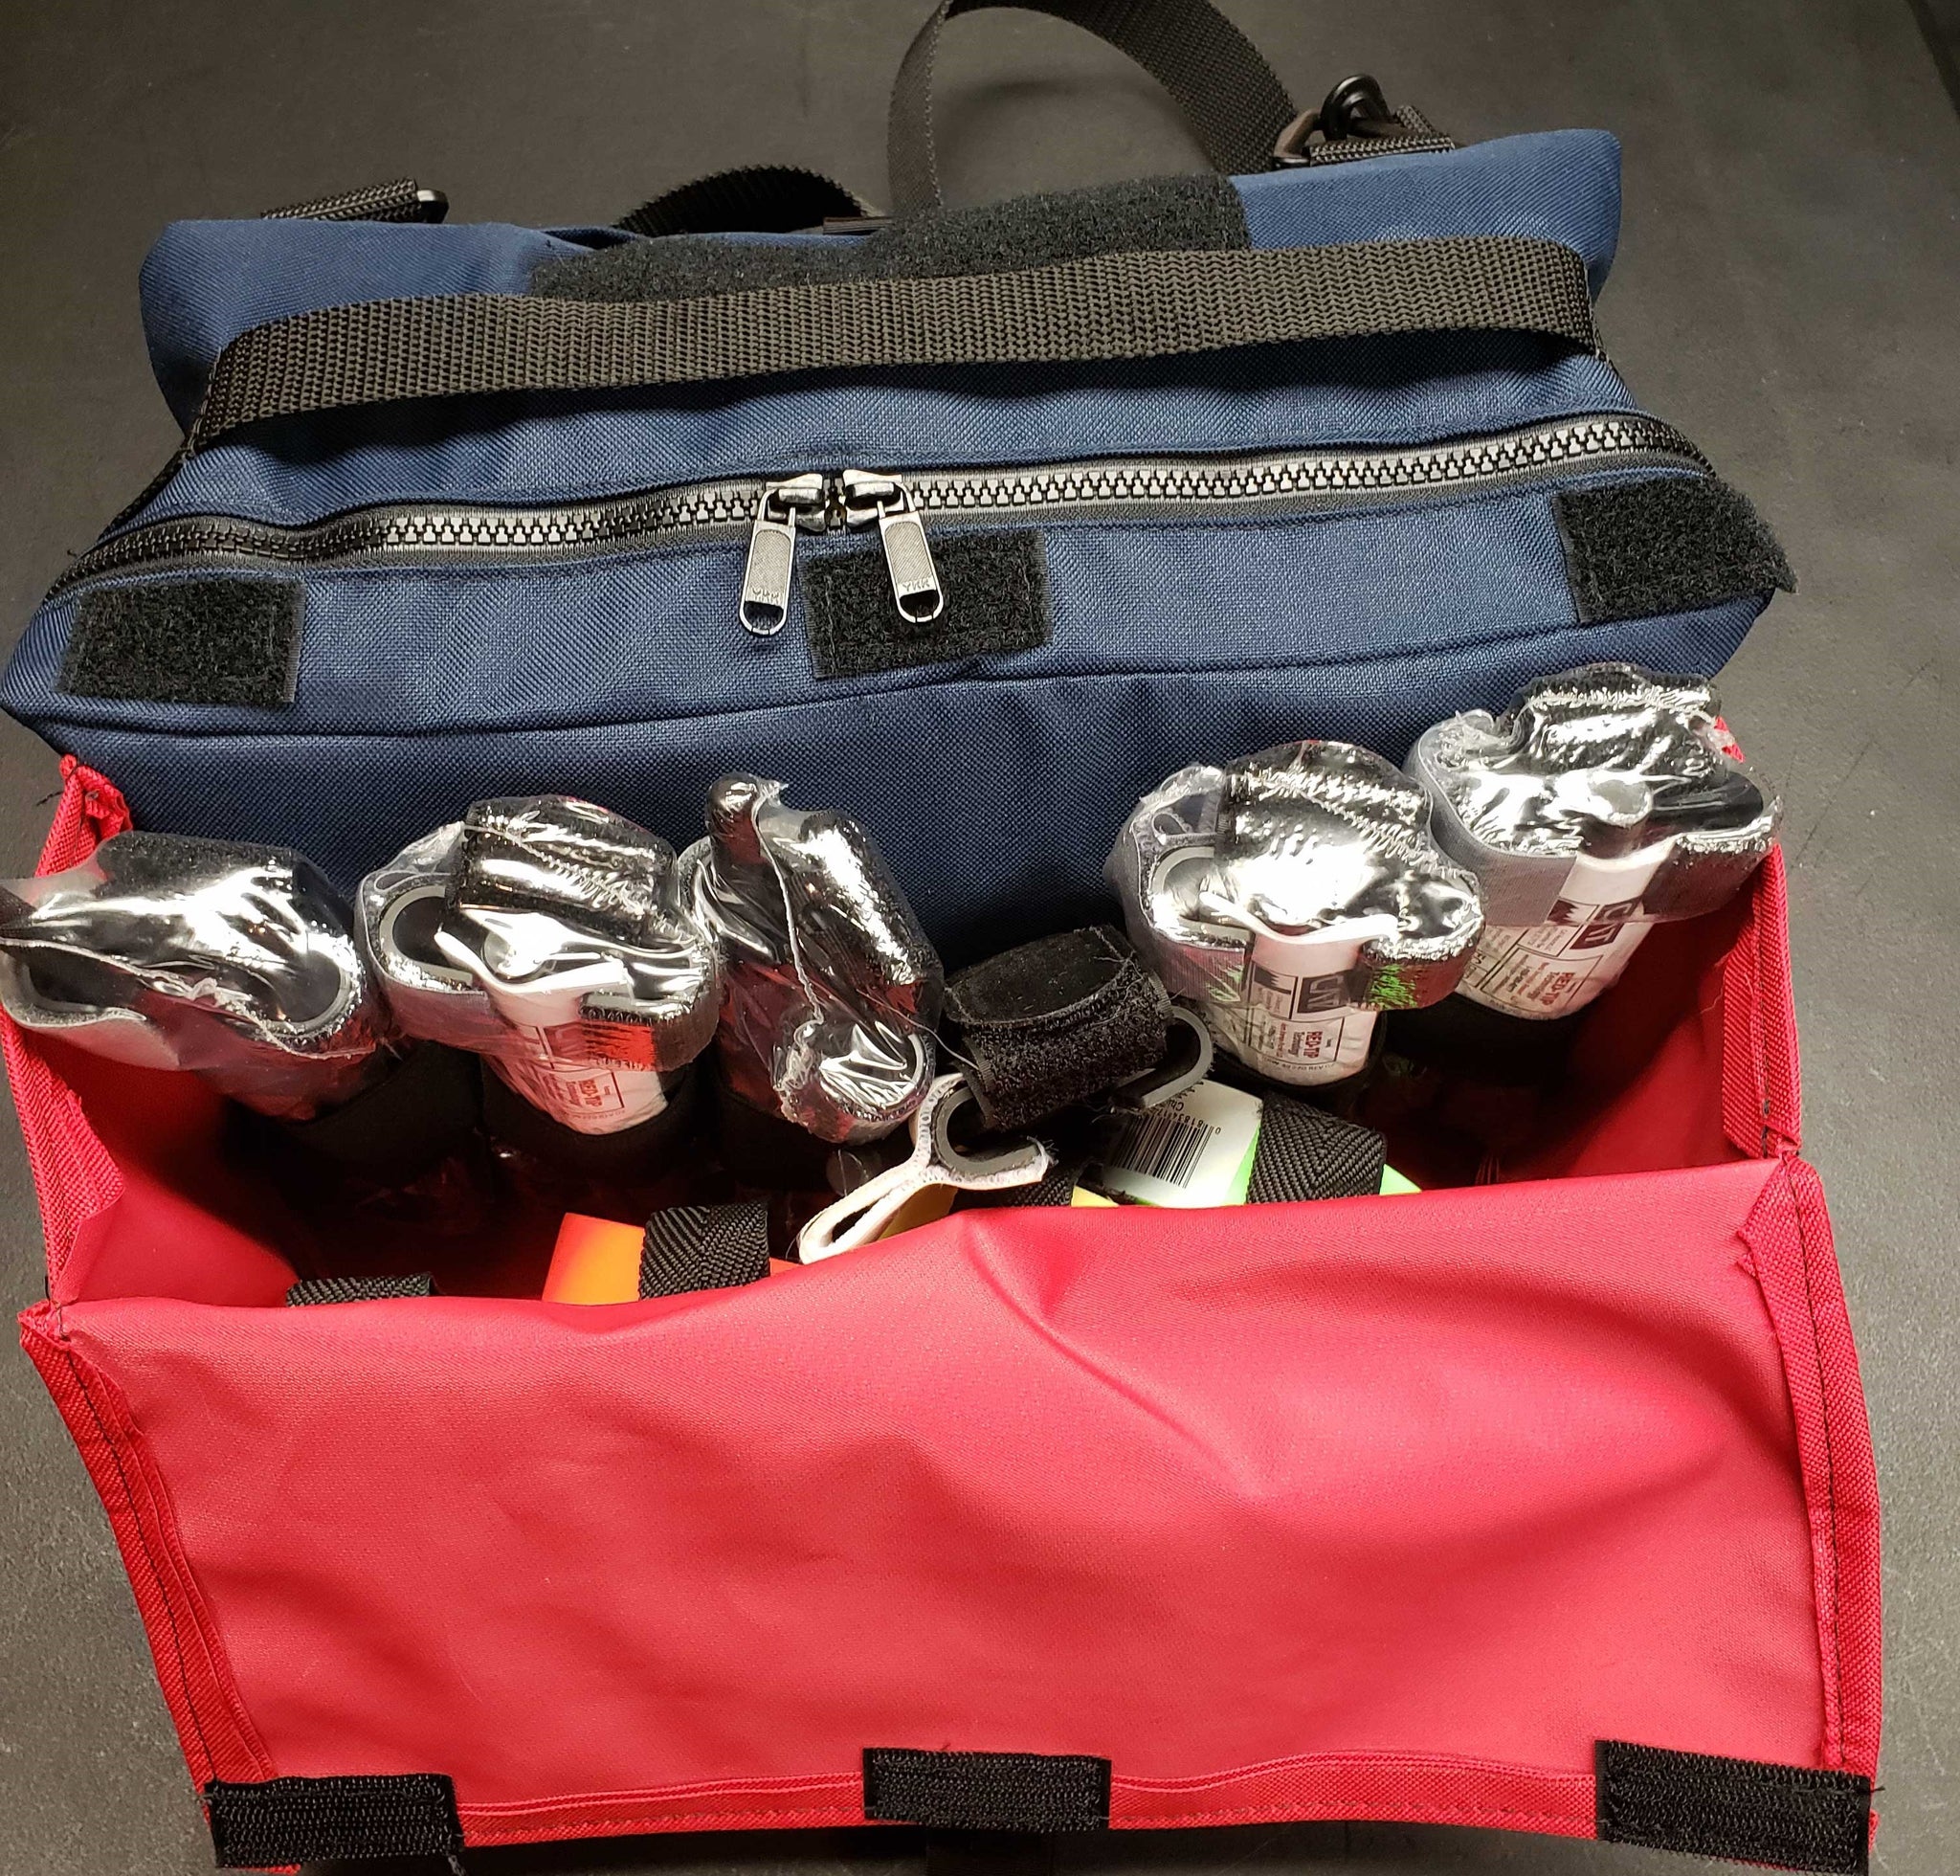 Rescue Pack, Tactical Emergency Casualty Care, Medic Bags